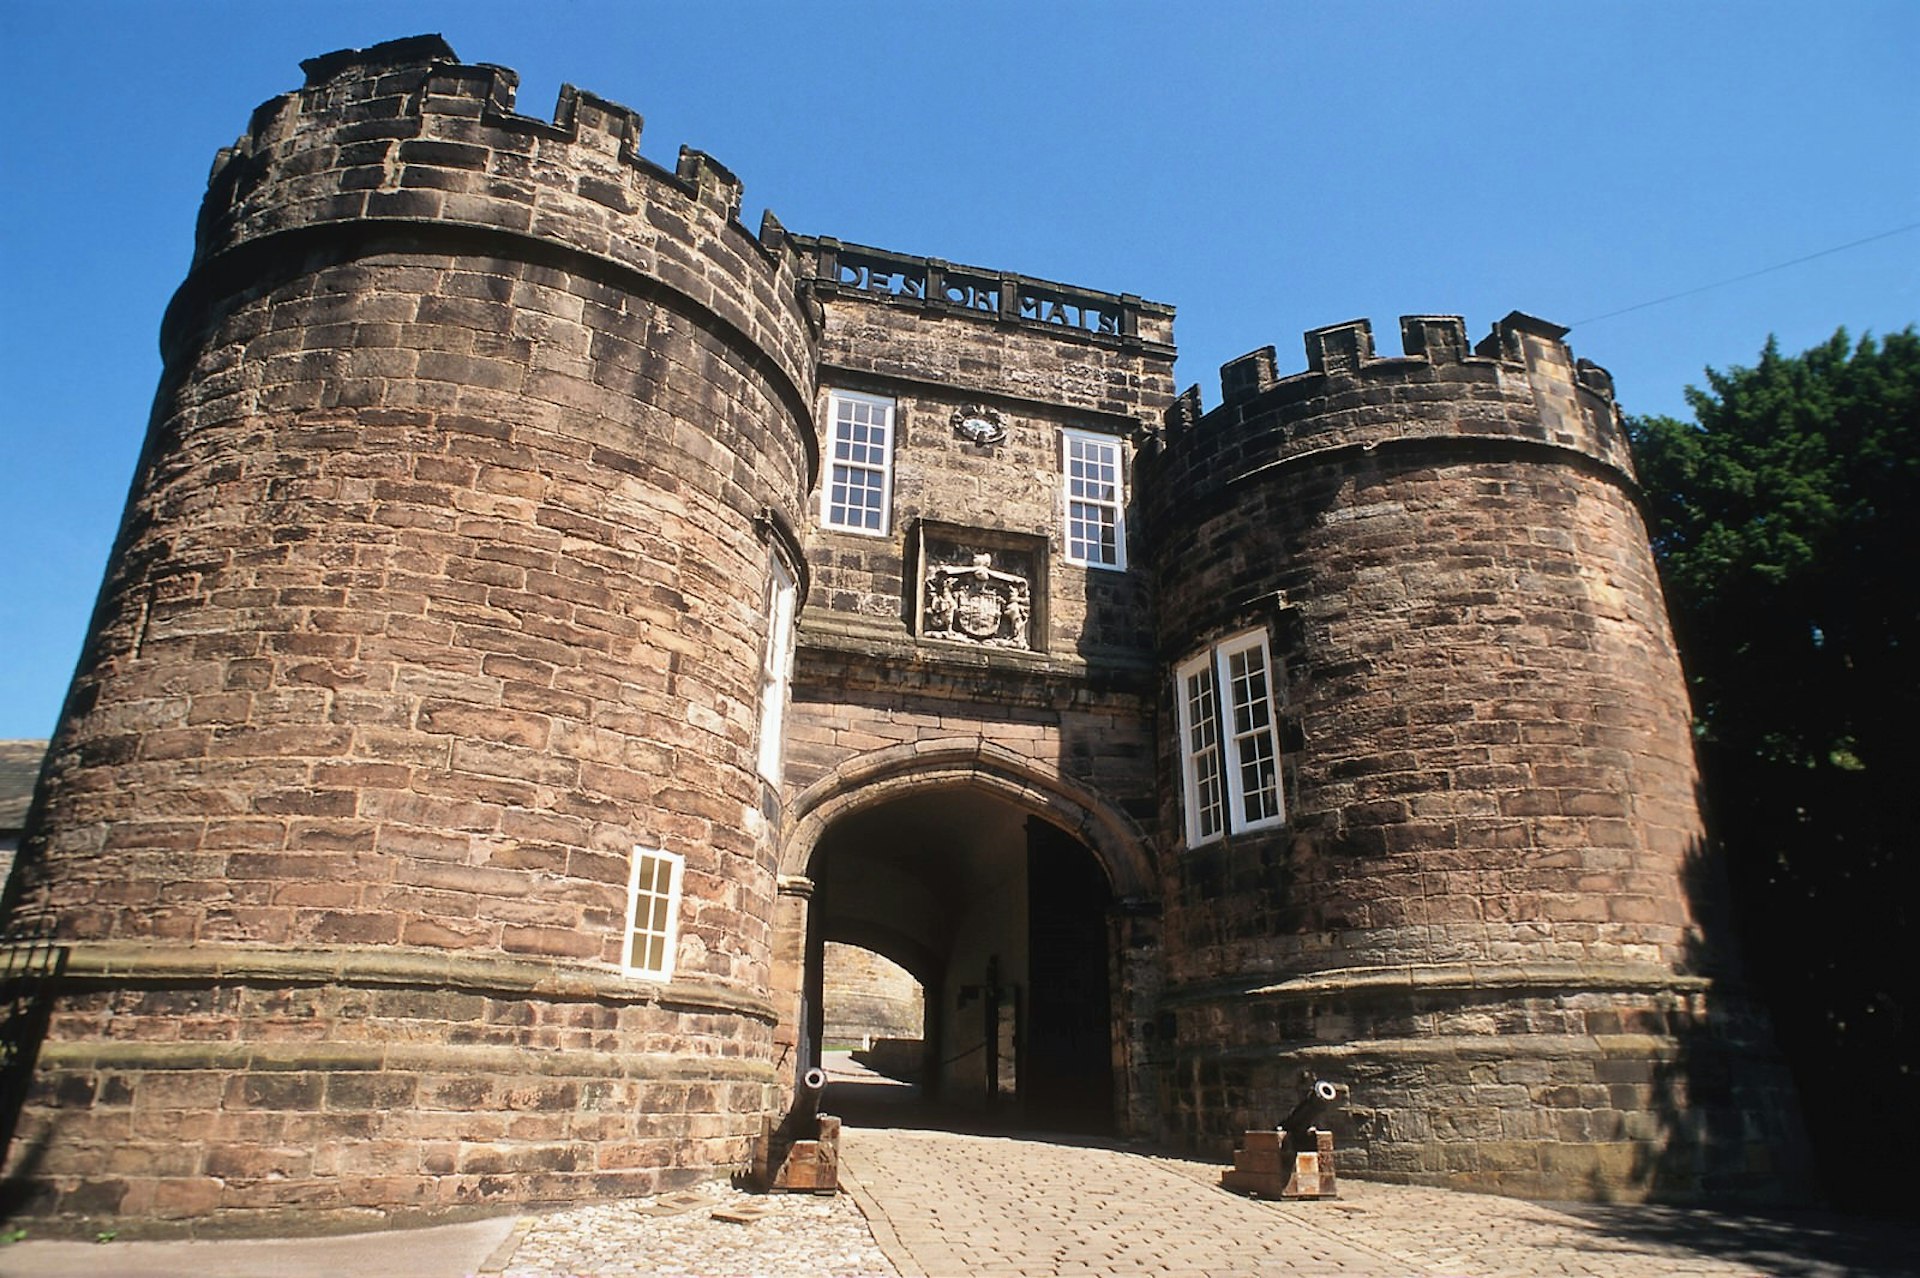 Centuries of history are well preserved at Skipton Castle © Epics / Contributor / Getty Images